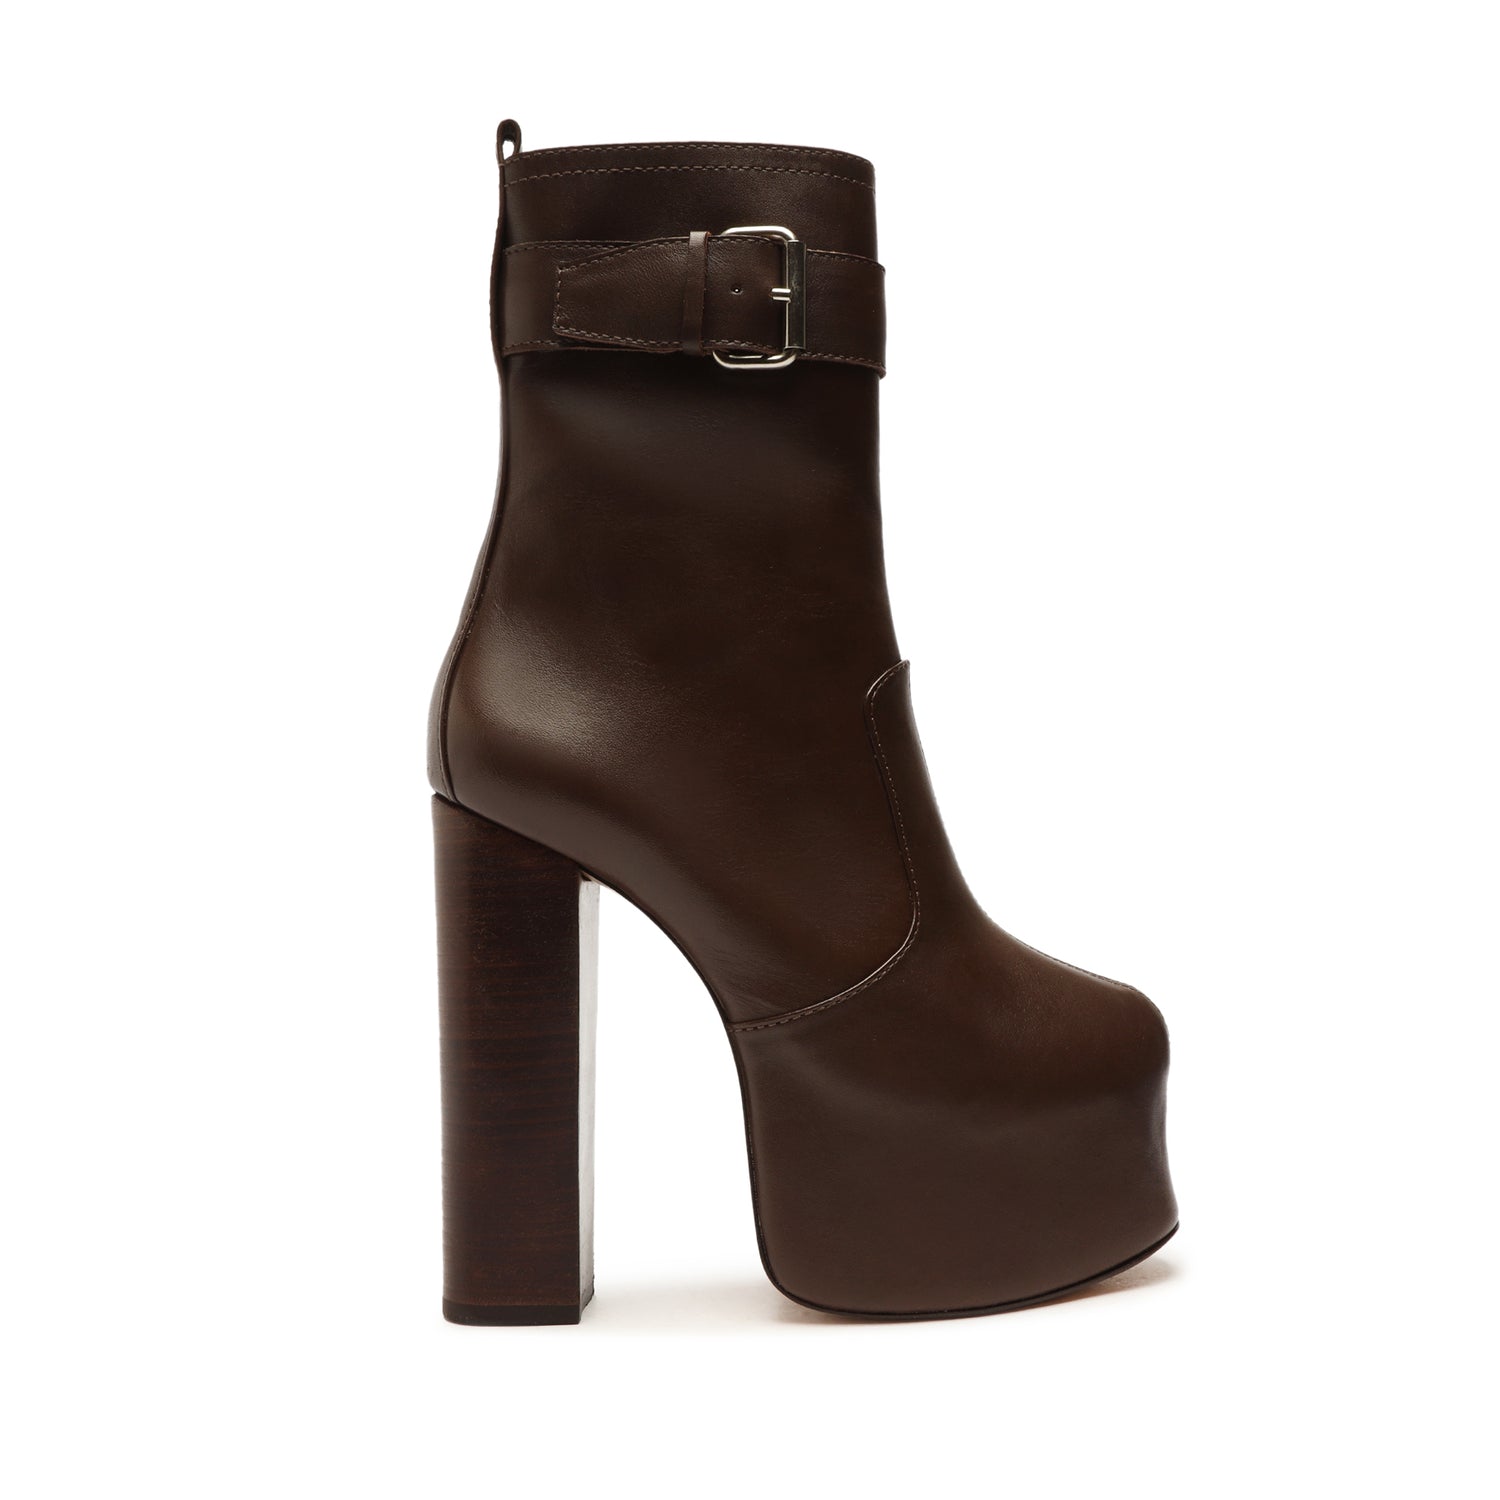 Aberdeen Buckle Bootie New Bison Faux Leather